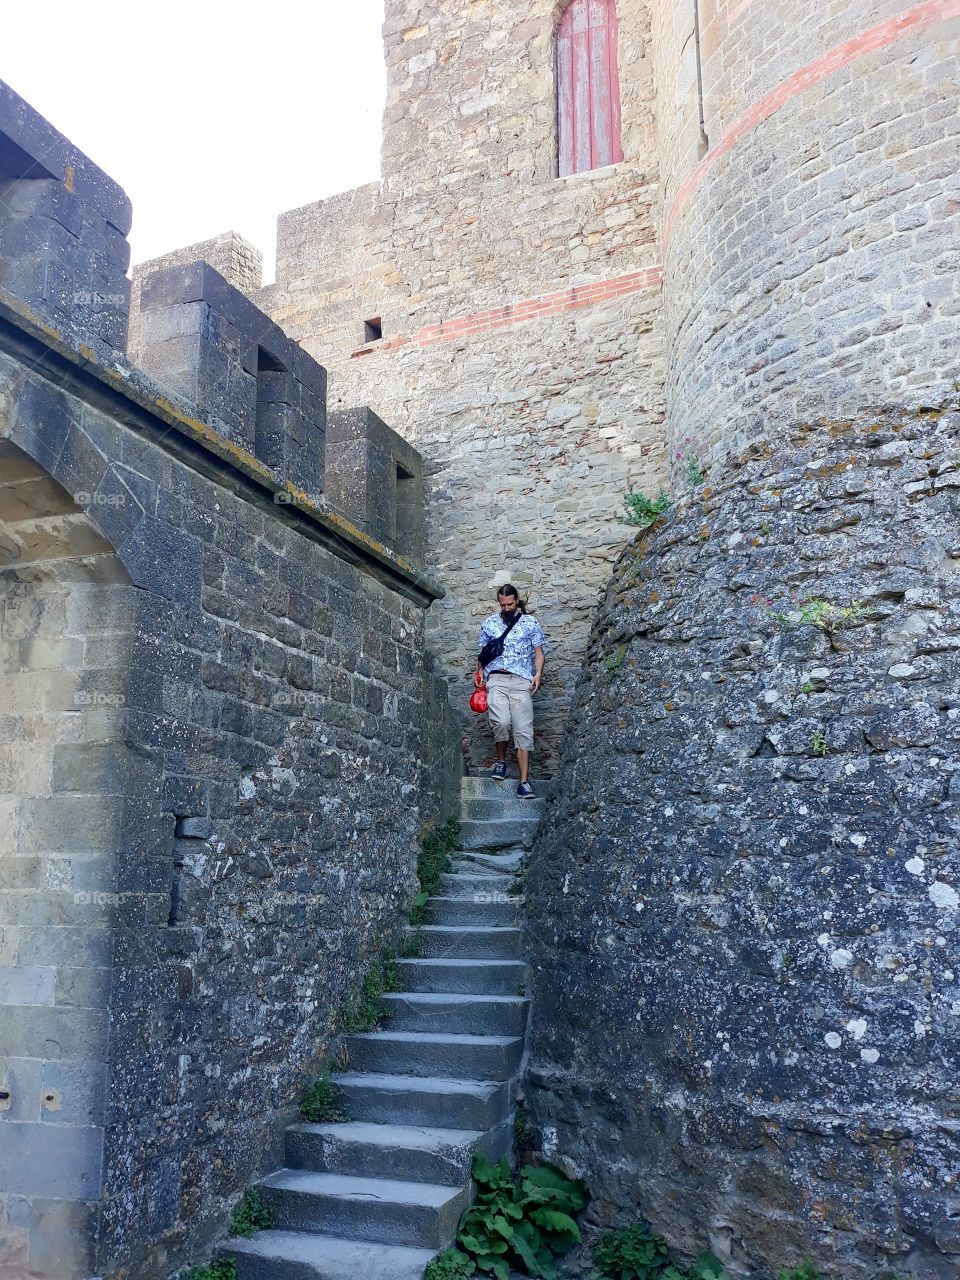 fortified city of Carcassonne, France